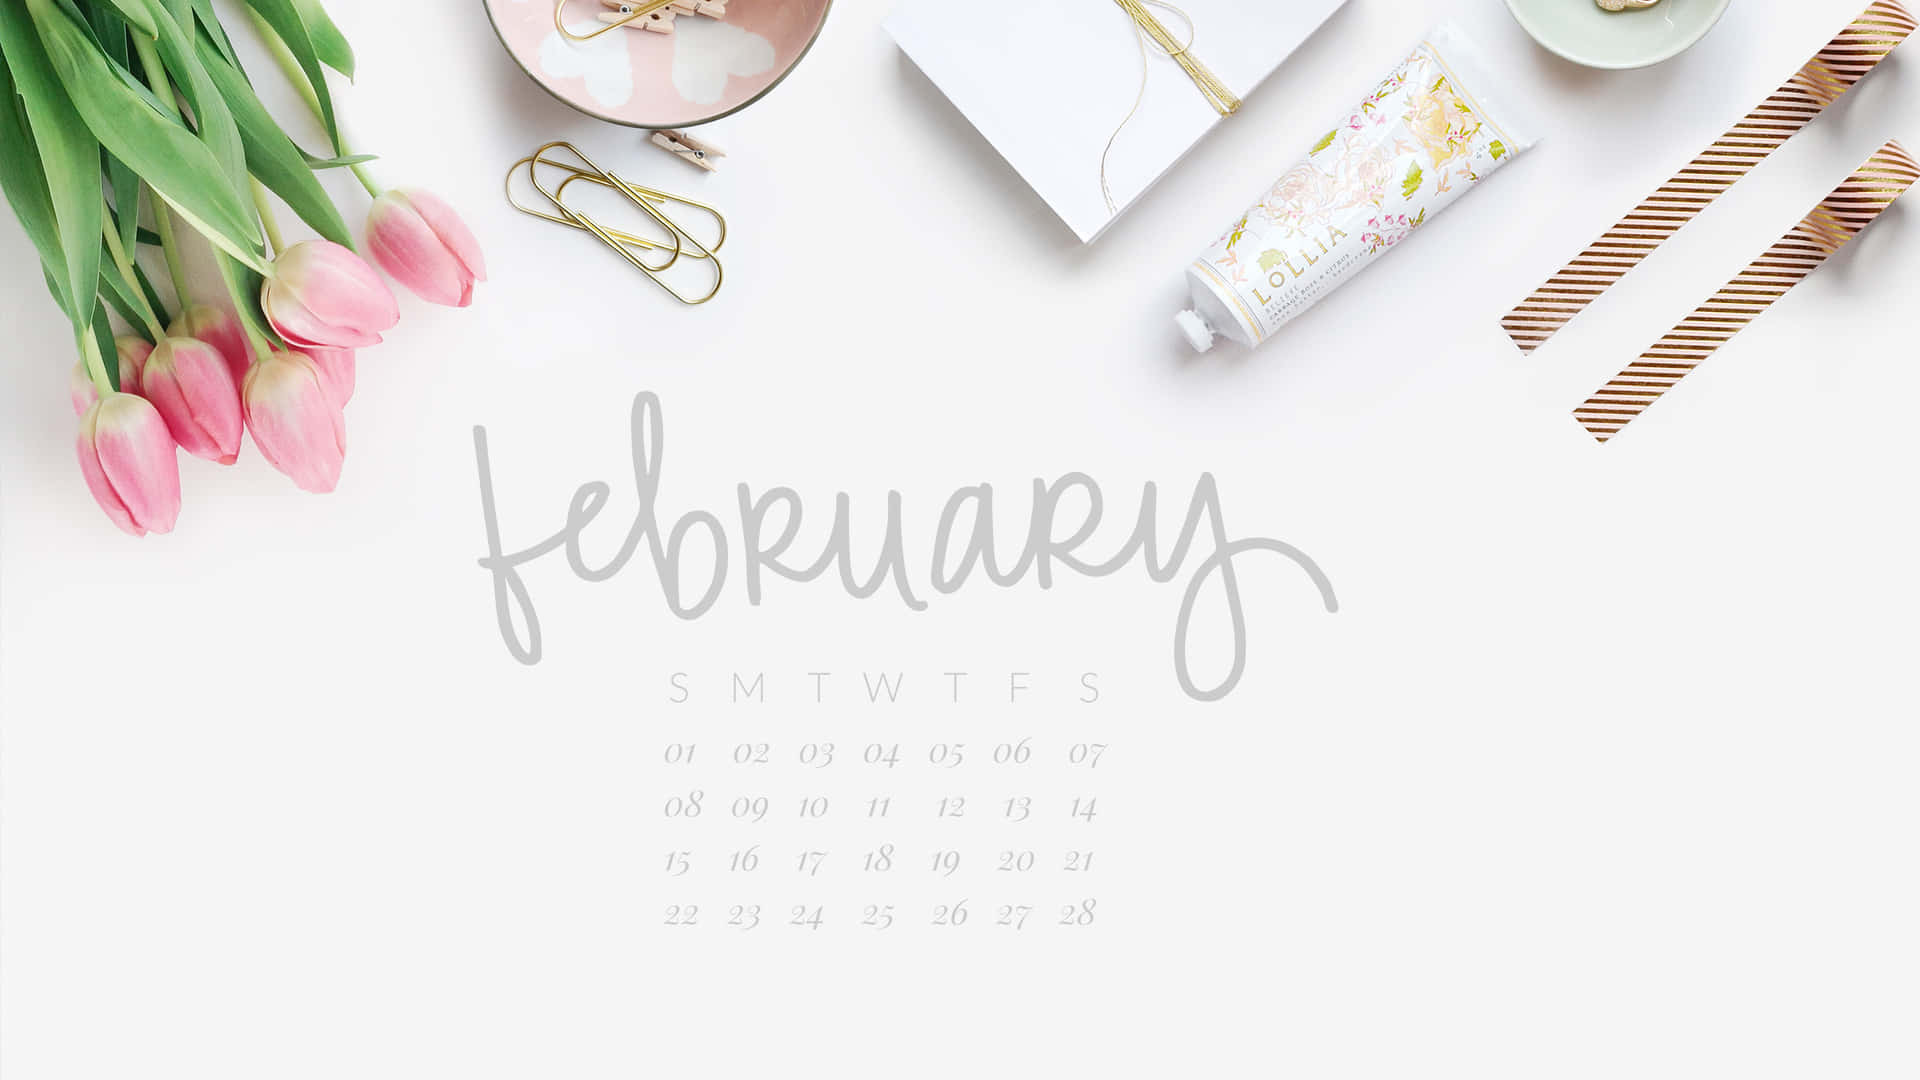 "February 2021 Calendar – Stay Organized and On Track" Wallpaper